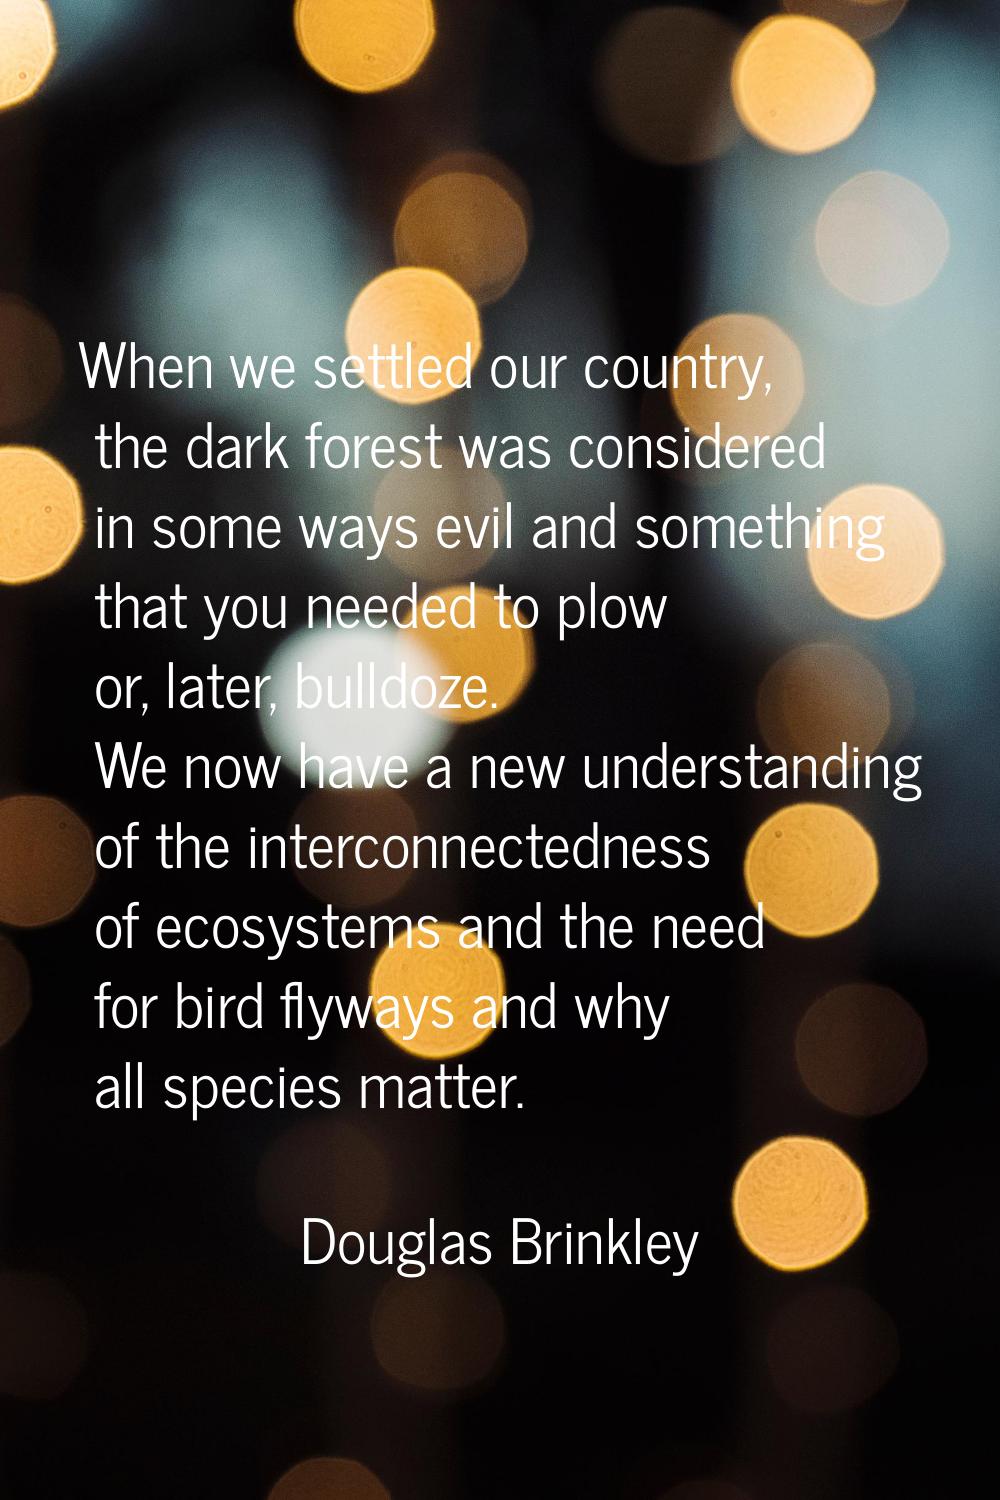 When we settled our country, the dark forest was considered in some ways evil and something that yo